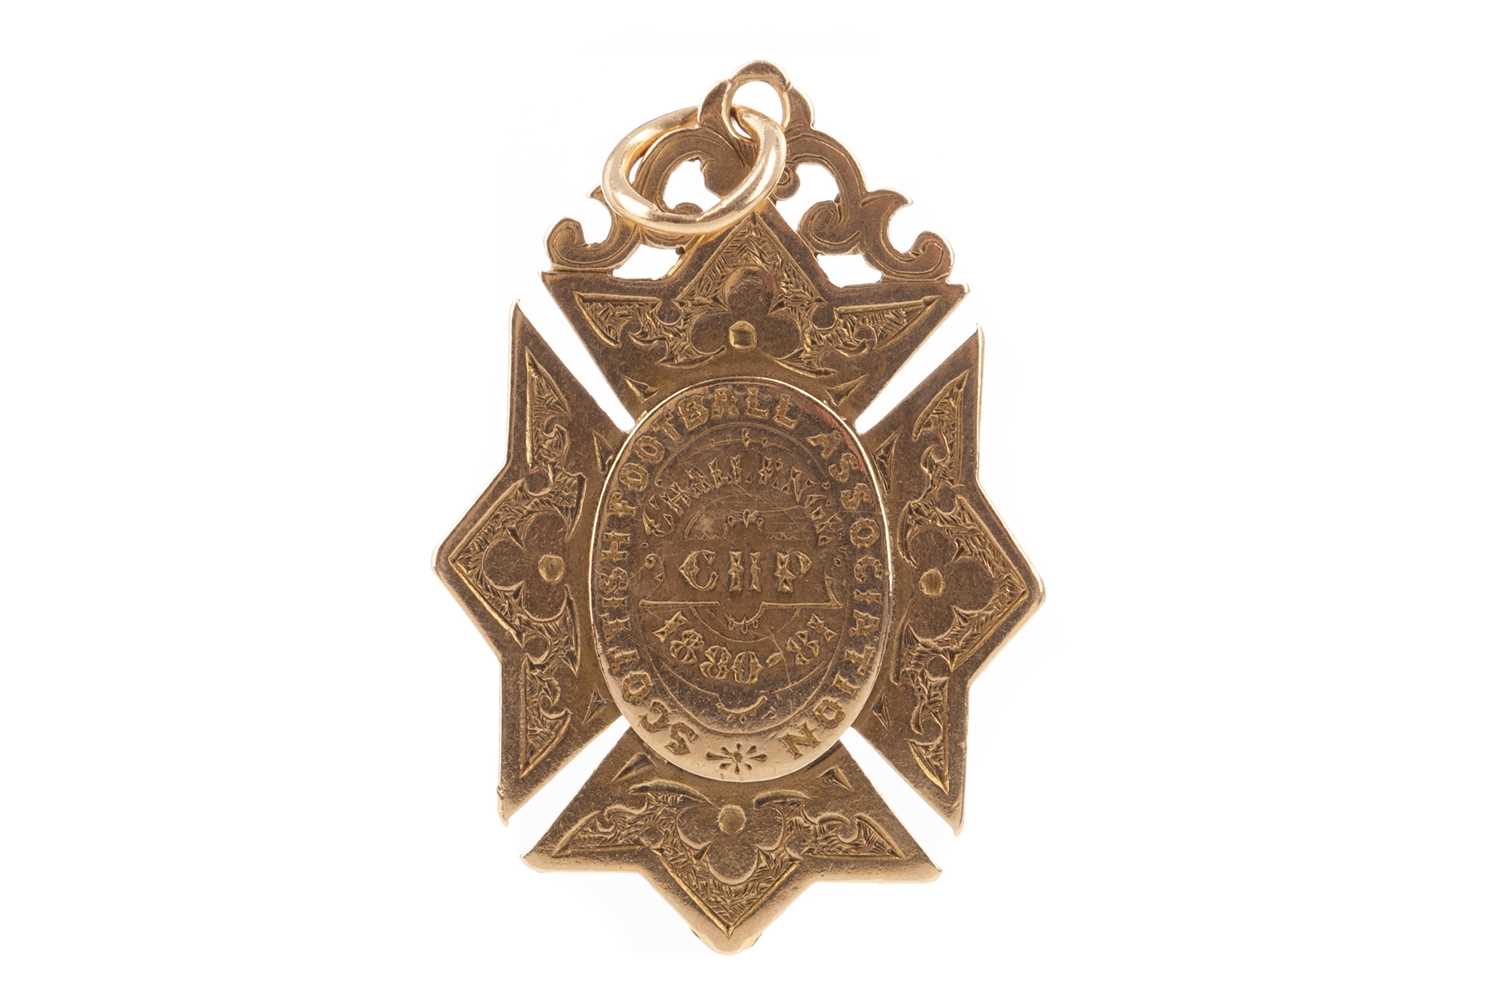 Lot 1568 - RARE AND EARLY - DAVID ALLAN OF QUEEN'S PARK, HIS SCOTTISH CUP WINNERS GOLD MEDAL, 1880-81